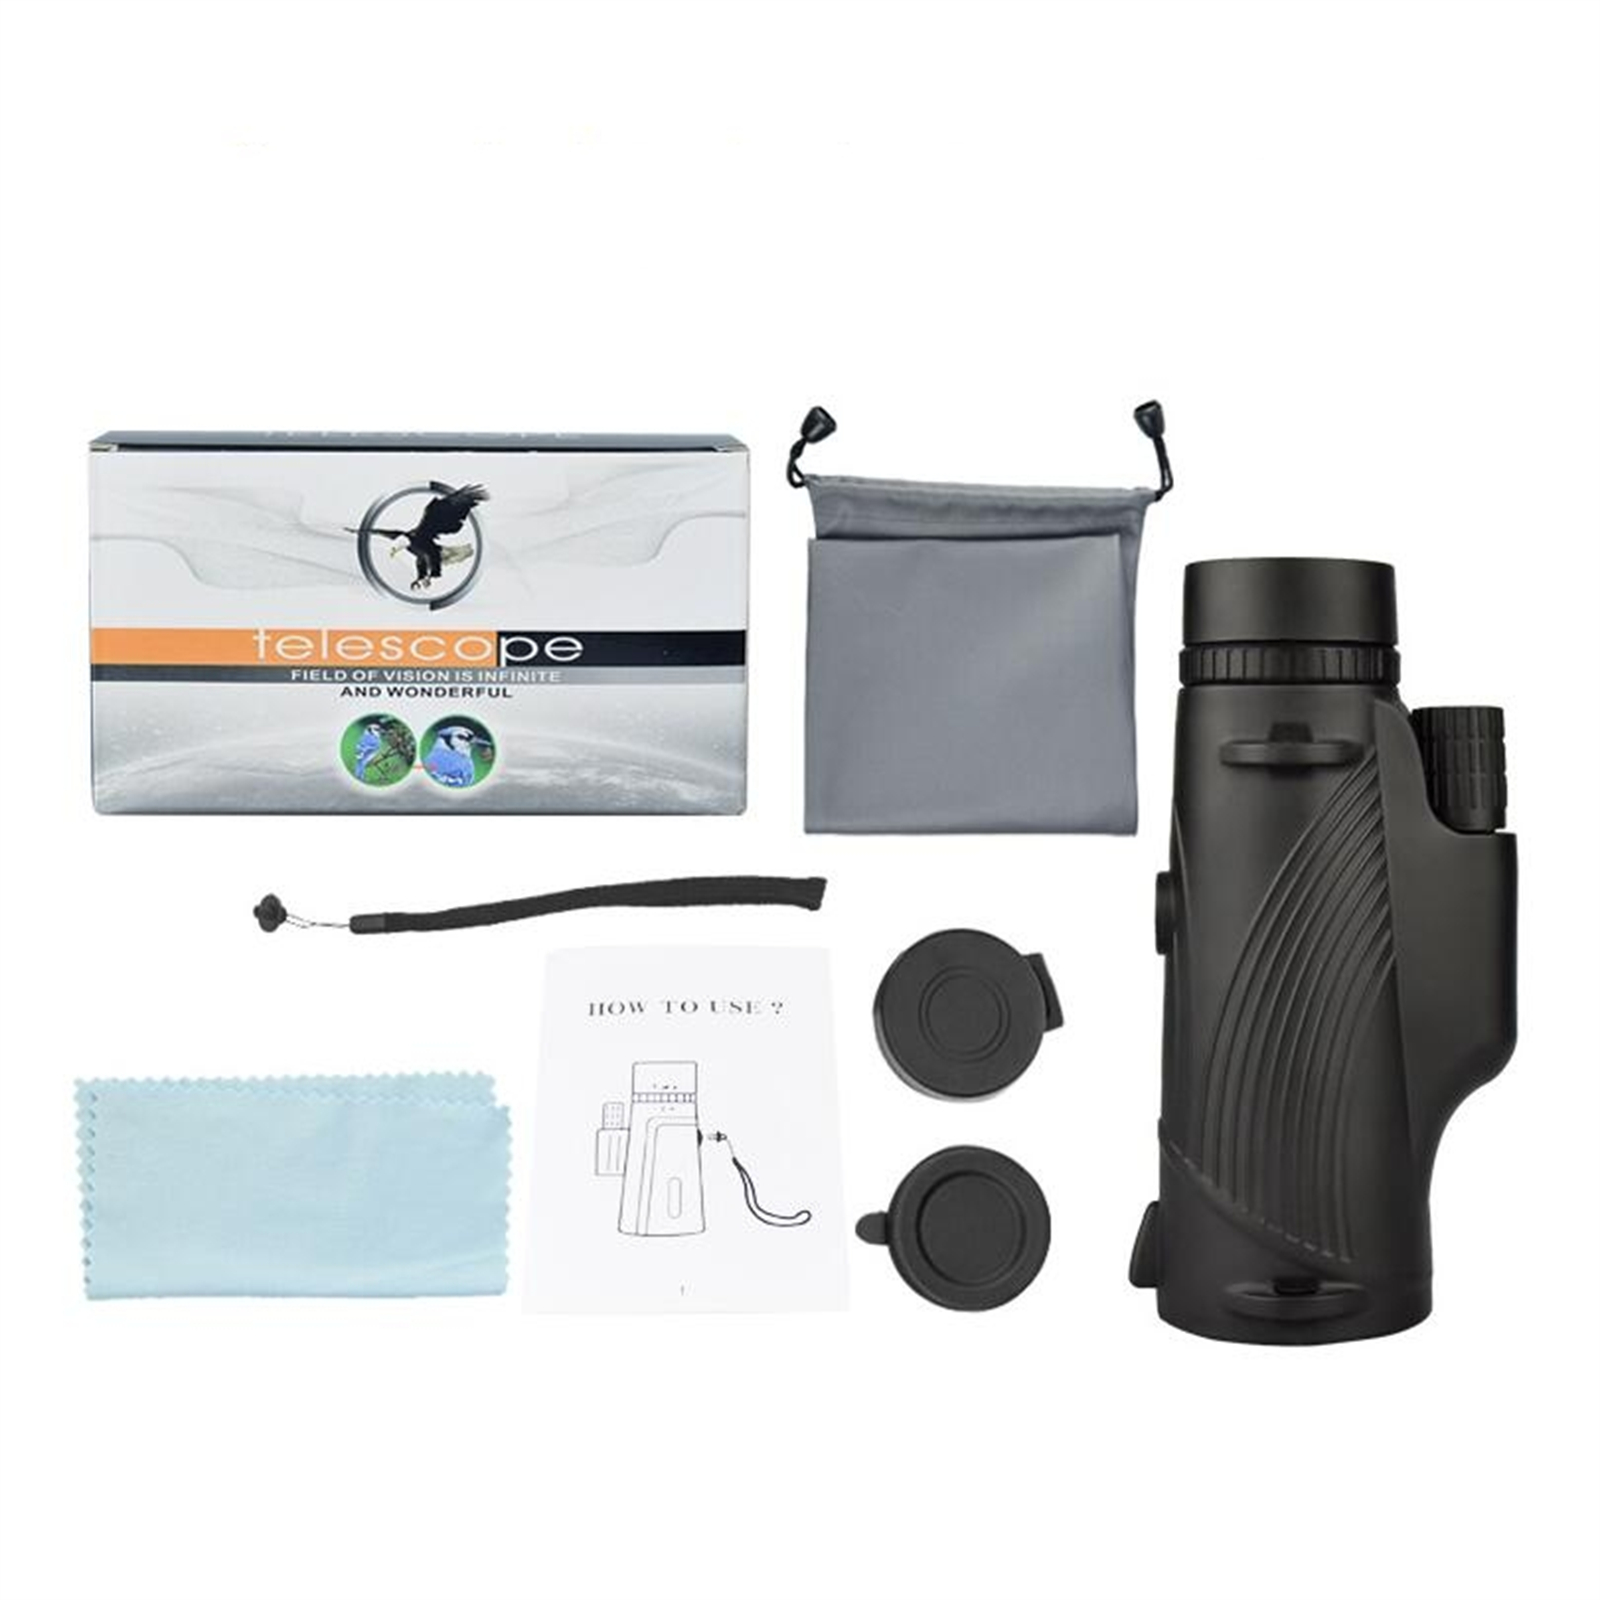 12x Bak4 Prism Monocular Hd Telescope with Portable Hand-held Wristband for Hiking Traveling